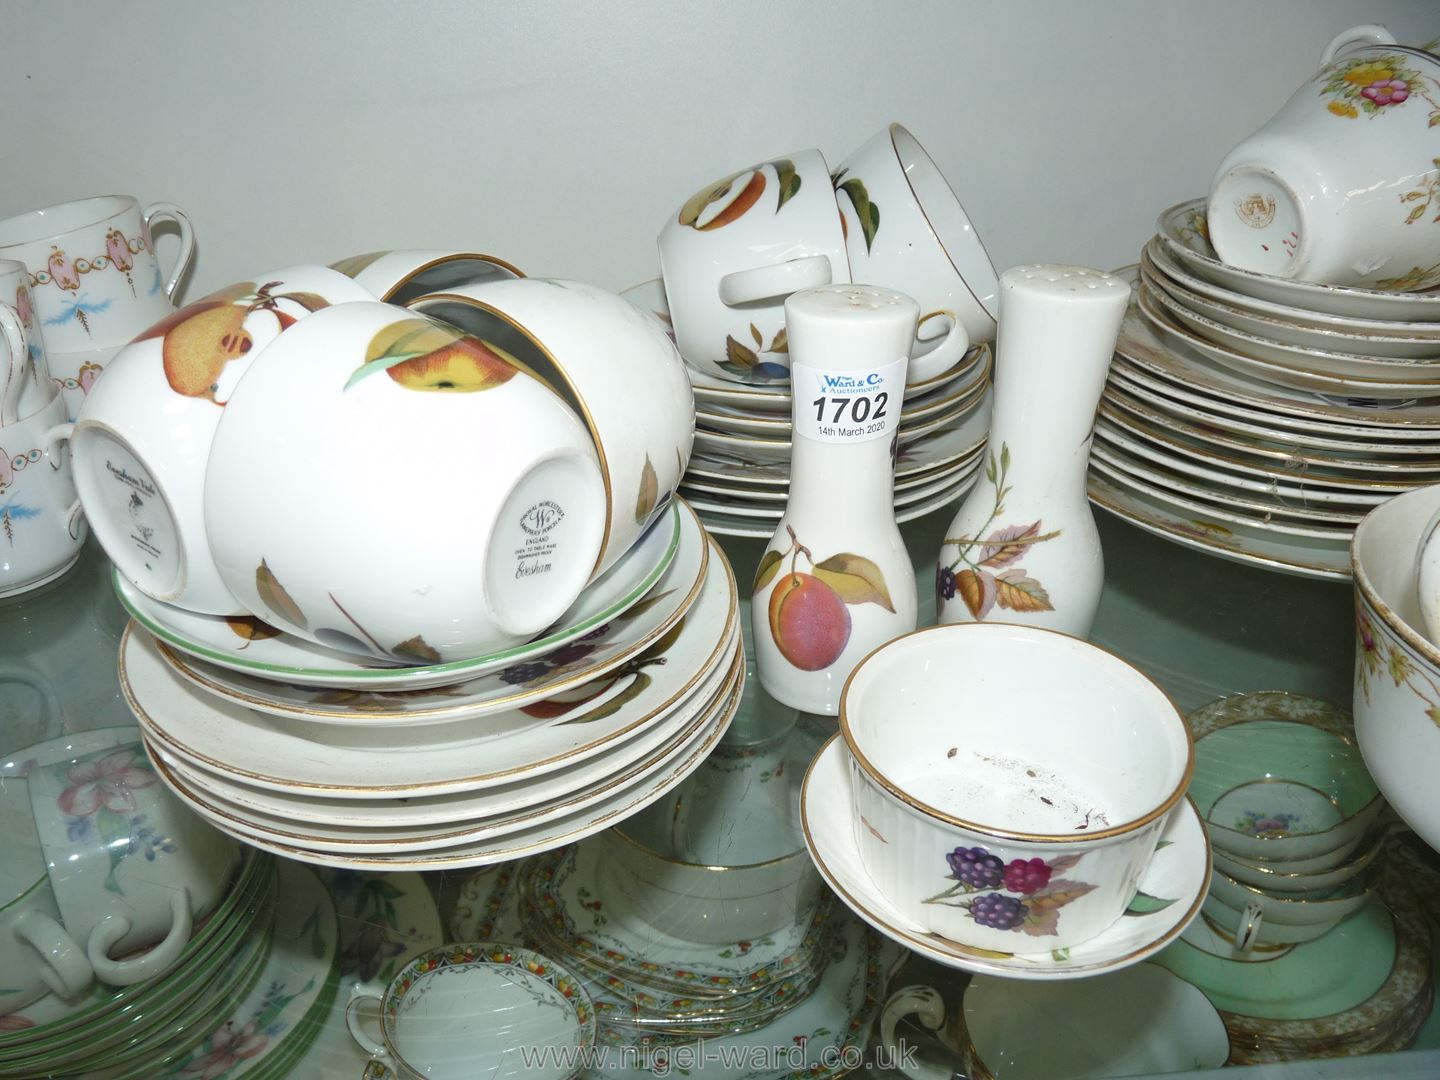 A part Royal Worcester 'Evesham' Teaset including eight plates, six cups and five saucers,